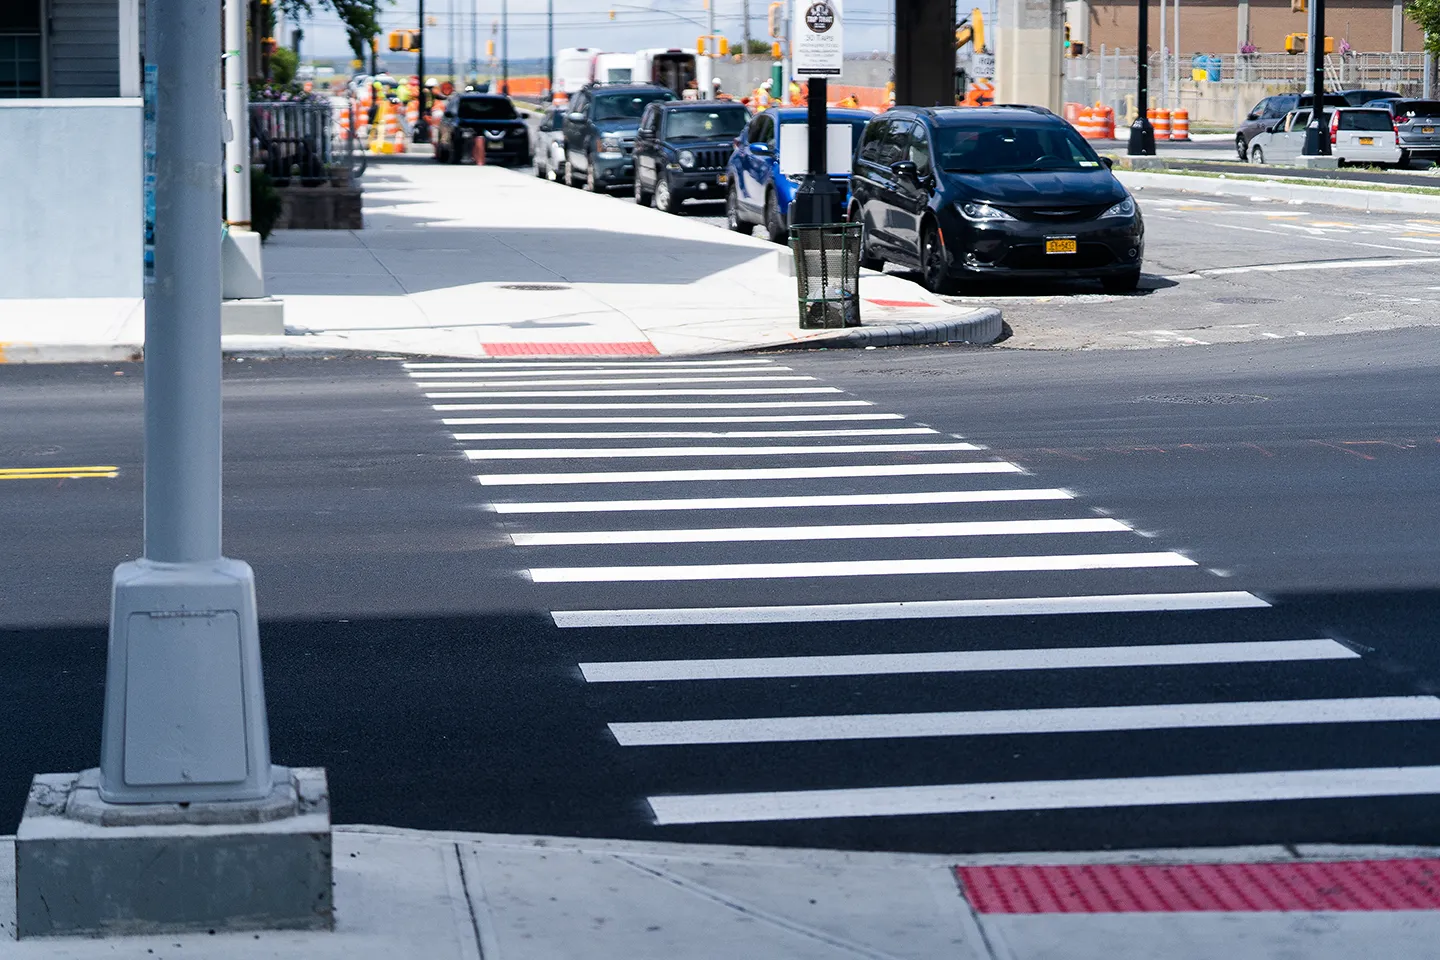 New ADA-compliant crosswalks were installed at all intersections.